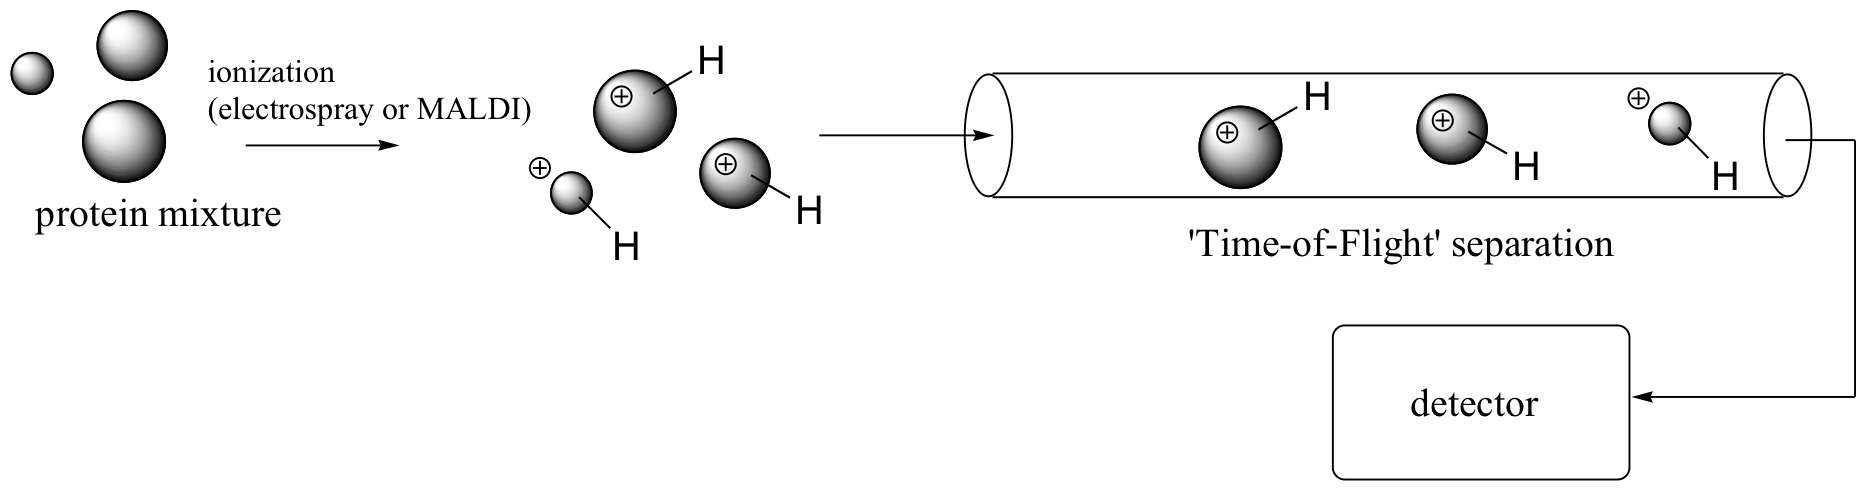 Three circle molecules labeled protein mixture. Arrow labeled ionization (electrospray or MALDI) protonates all three molecules. Molecules put in tube labeled 'Time-of-flight' separation. Arrow goes from tube to rectangle labeled detector.